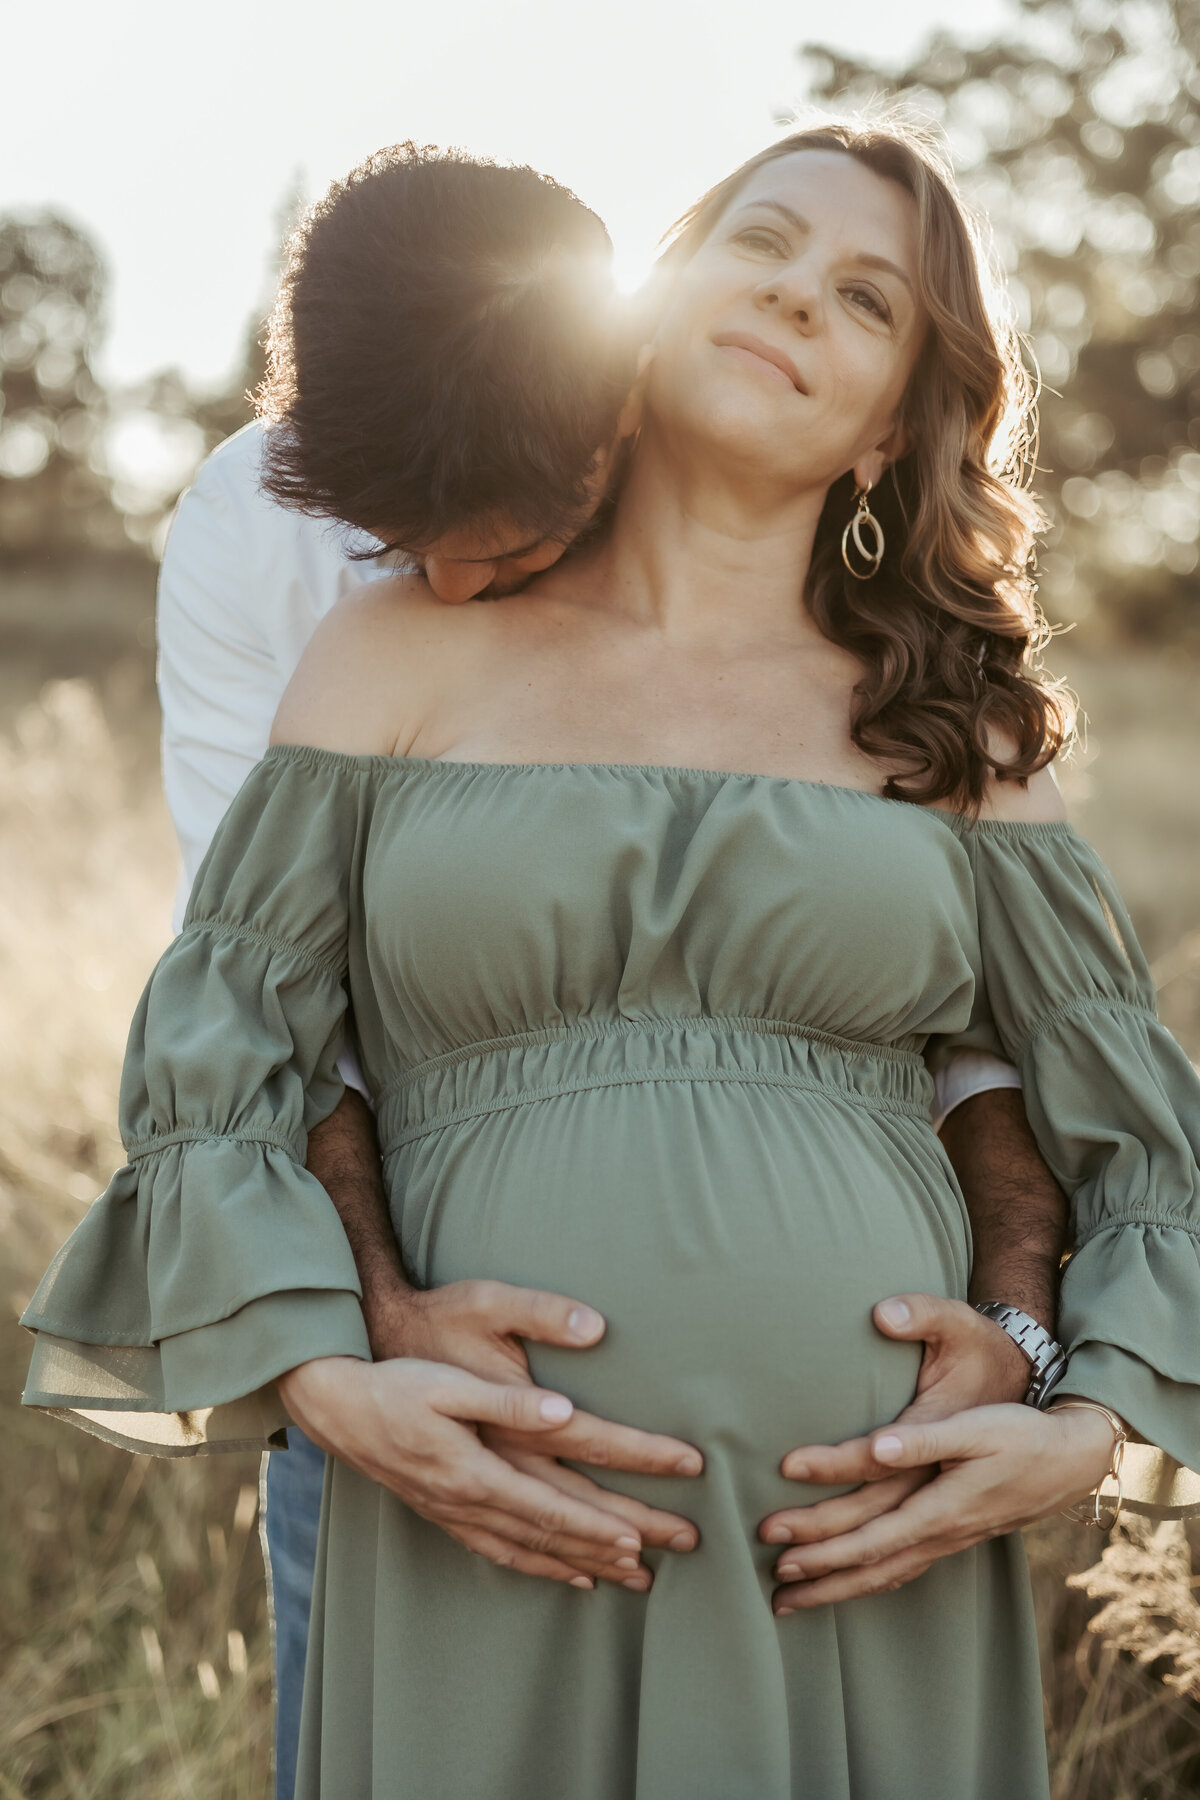 Pregnant wife and her husband both cradling her growing belly while he gently kisses her neck and the sun glows between them